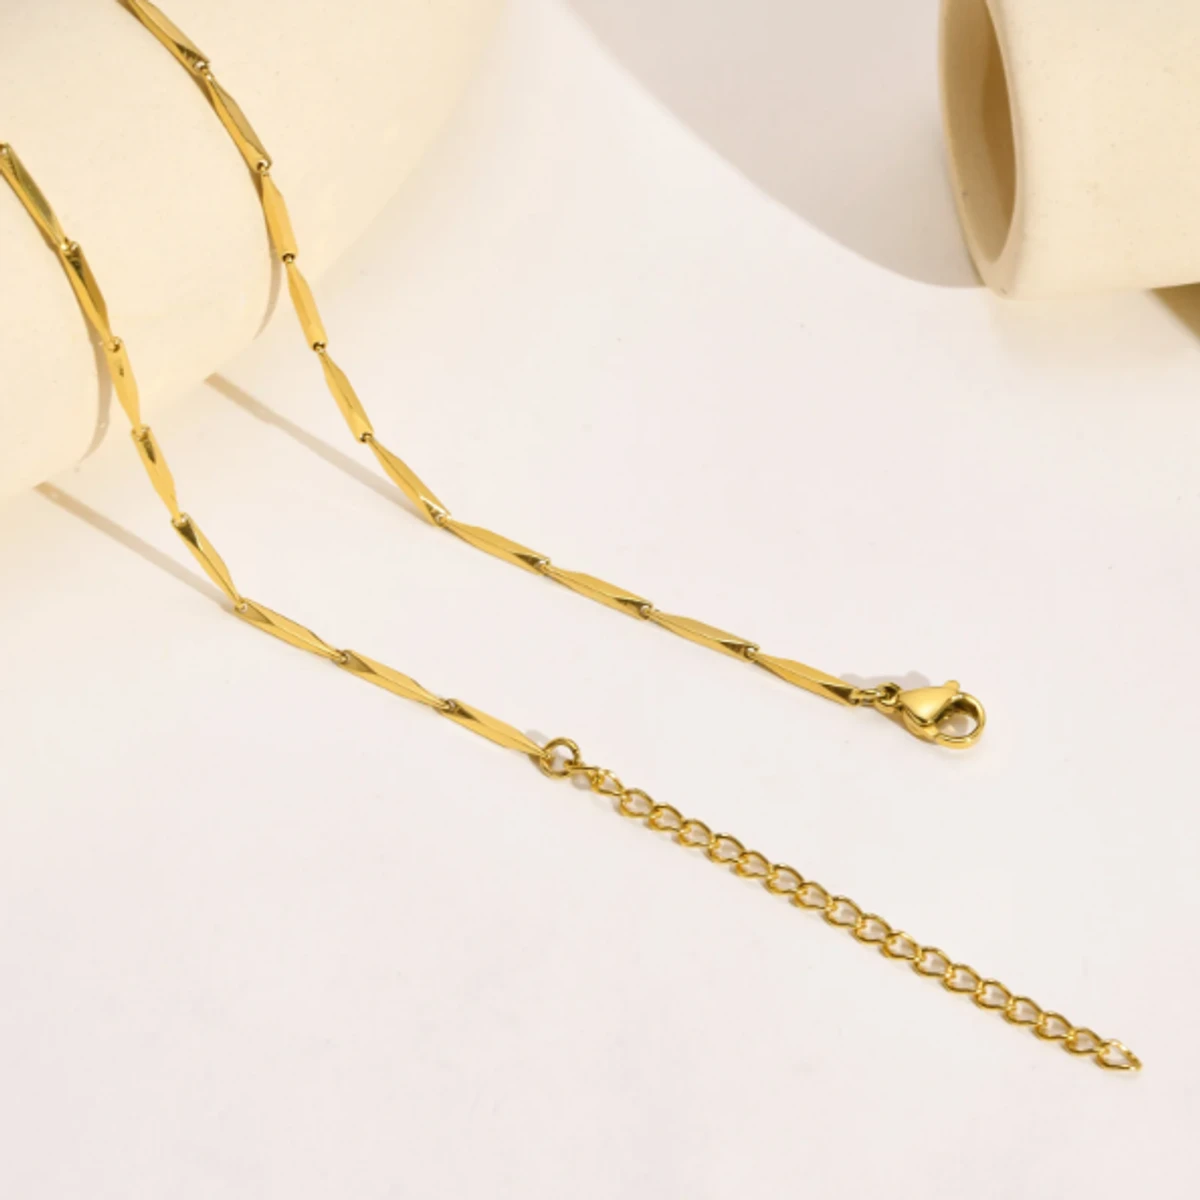 Fashionable New Golden Rich Chain For Women